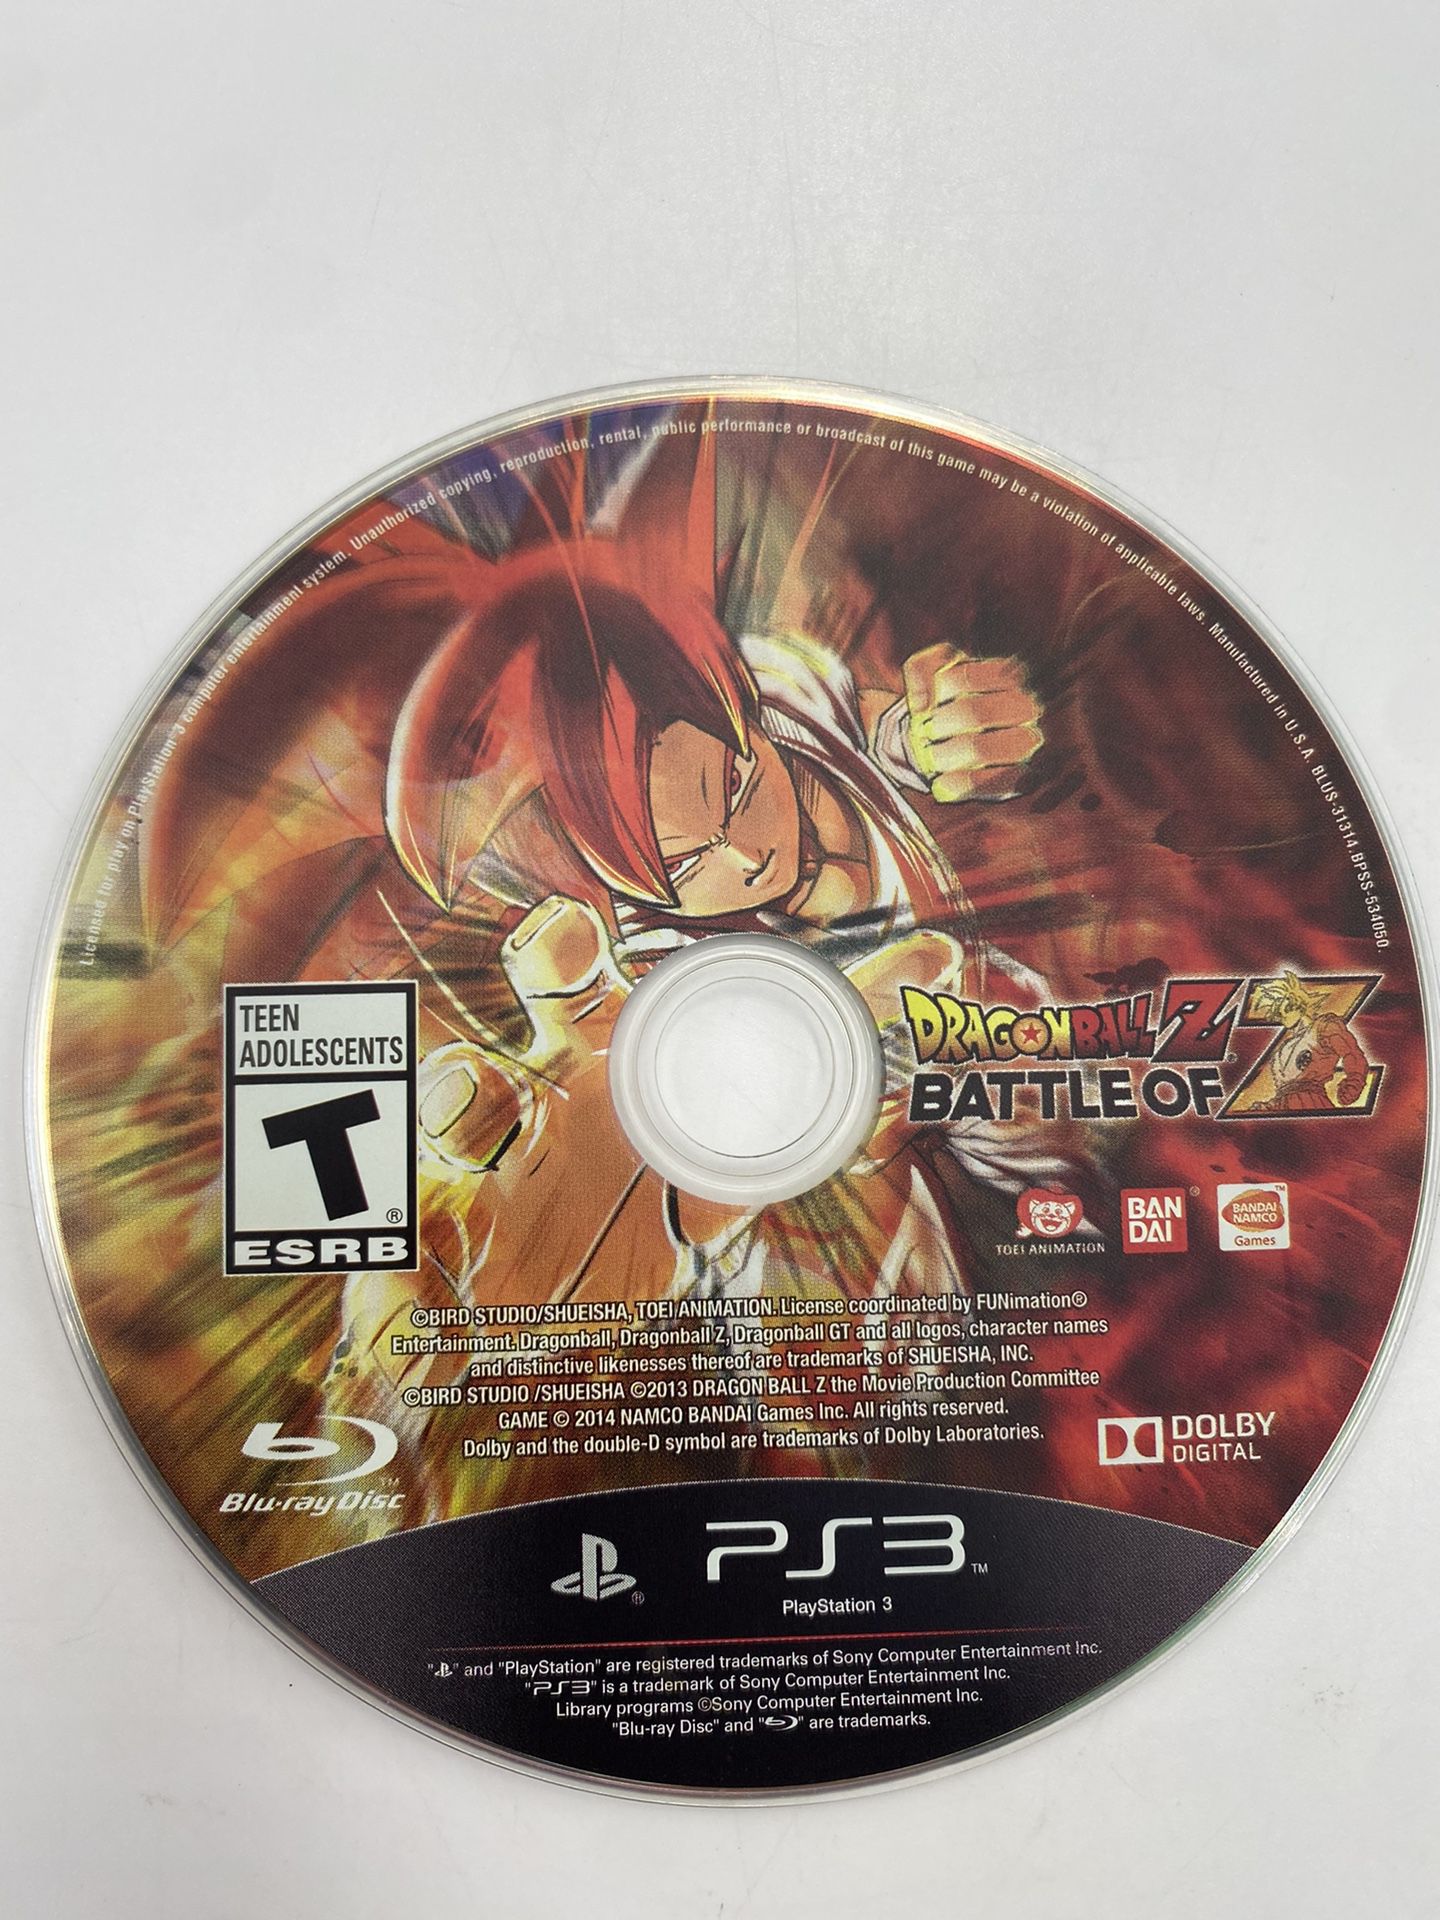 Dragon Ball Z Battle of Z Playstation 3 PS3 Video Game Disc Only TESTED WORKS